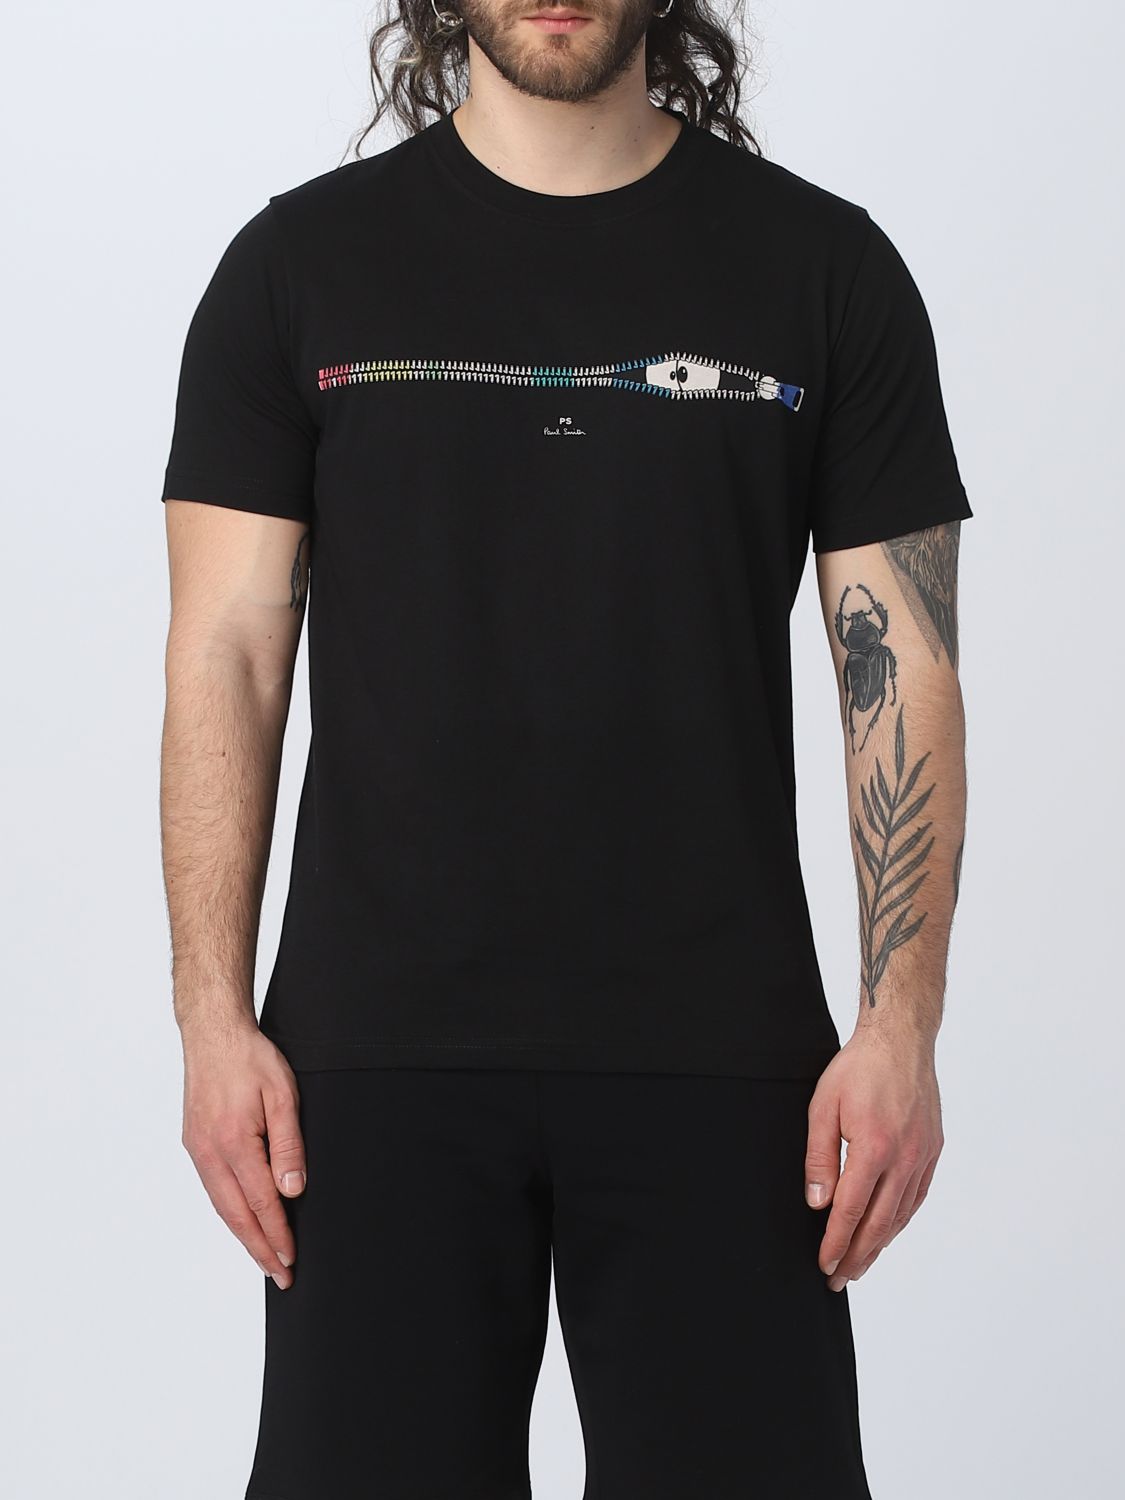 PS PAUL SMITH: t-shirt for man - Black | Ps Paul Smith t-shirt ...